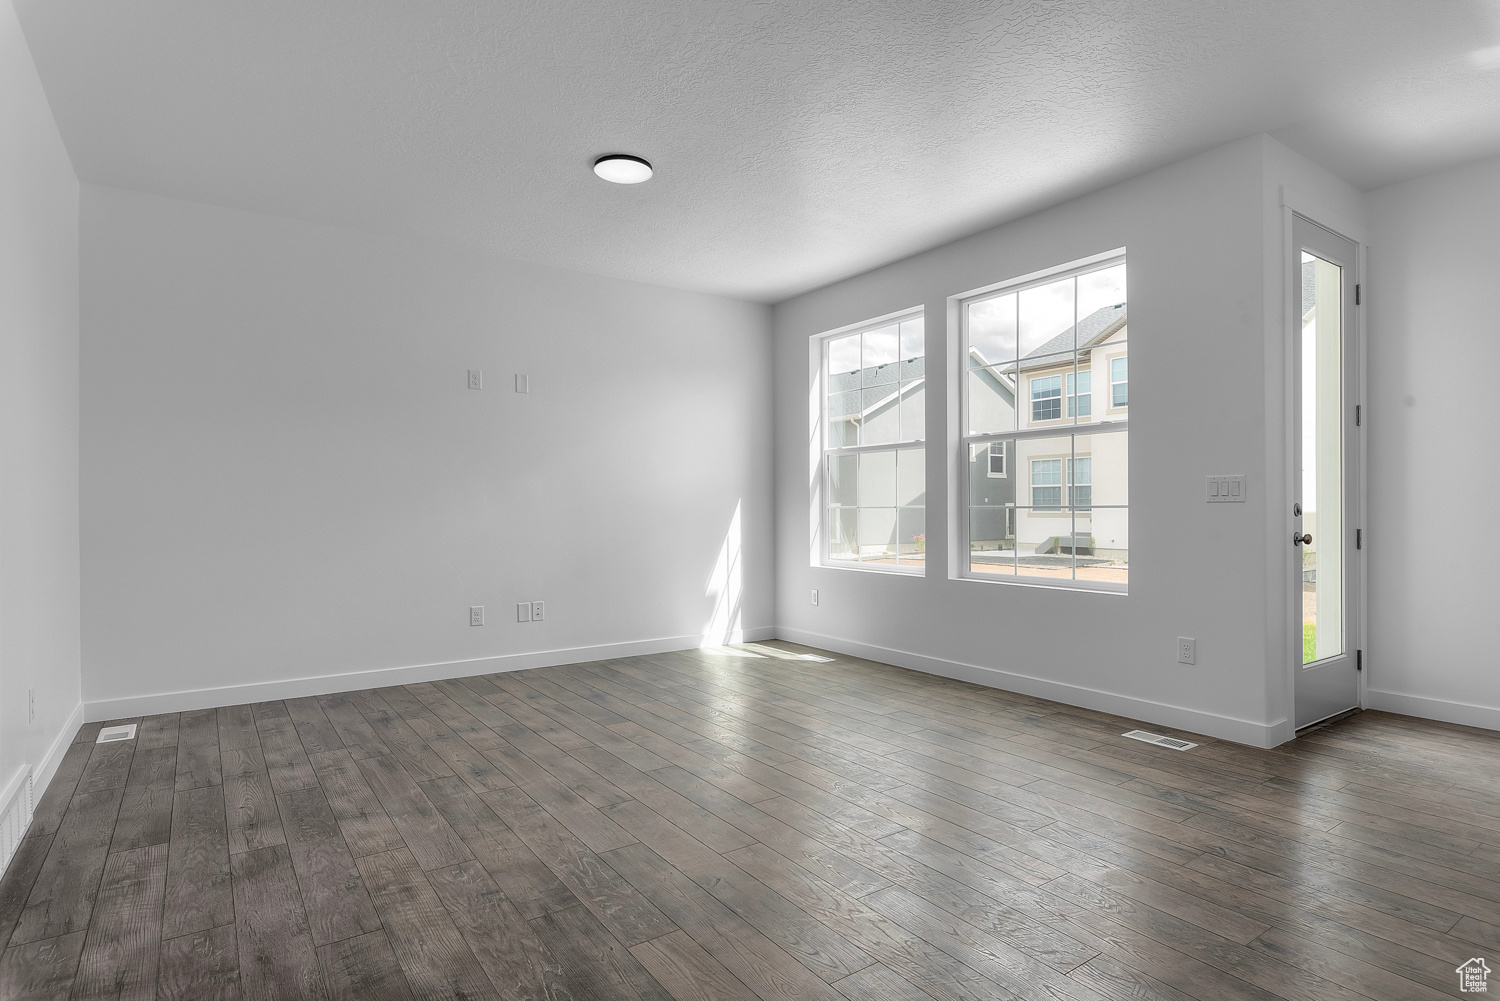 Unfurnished room with a textured ceiling and dark wood-type flooring